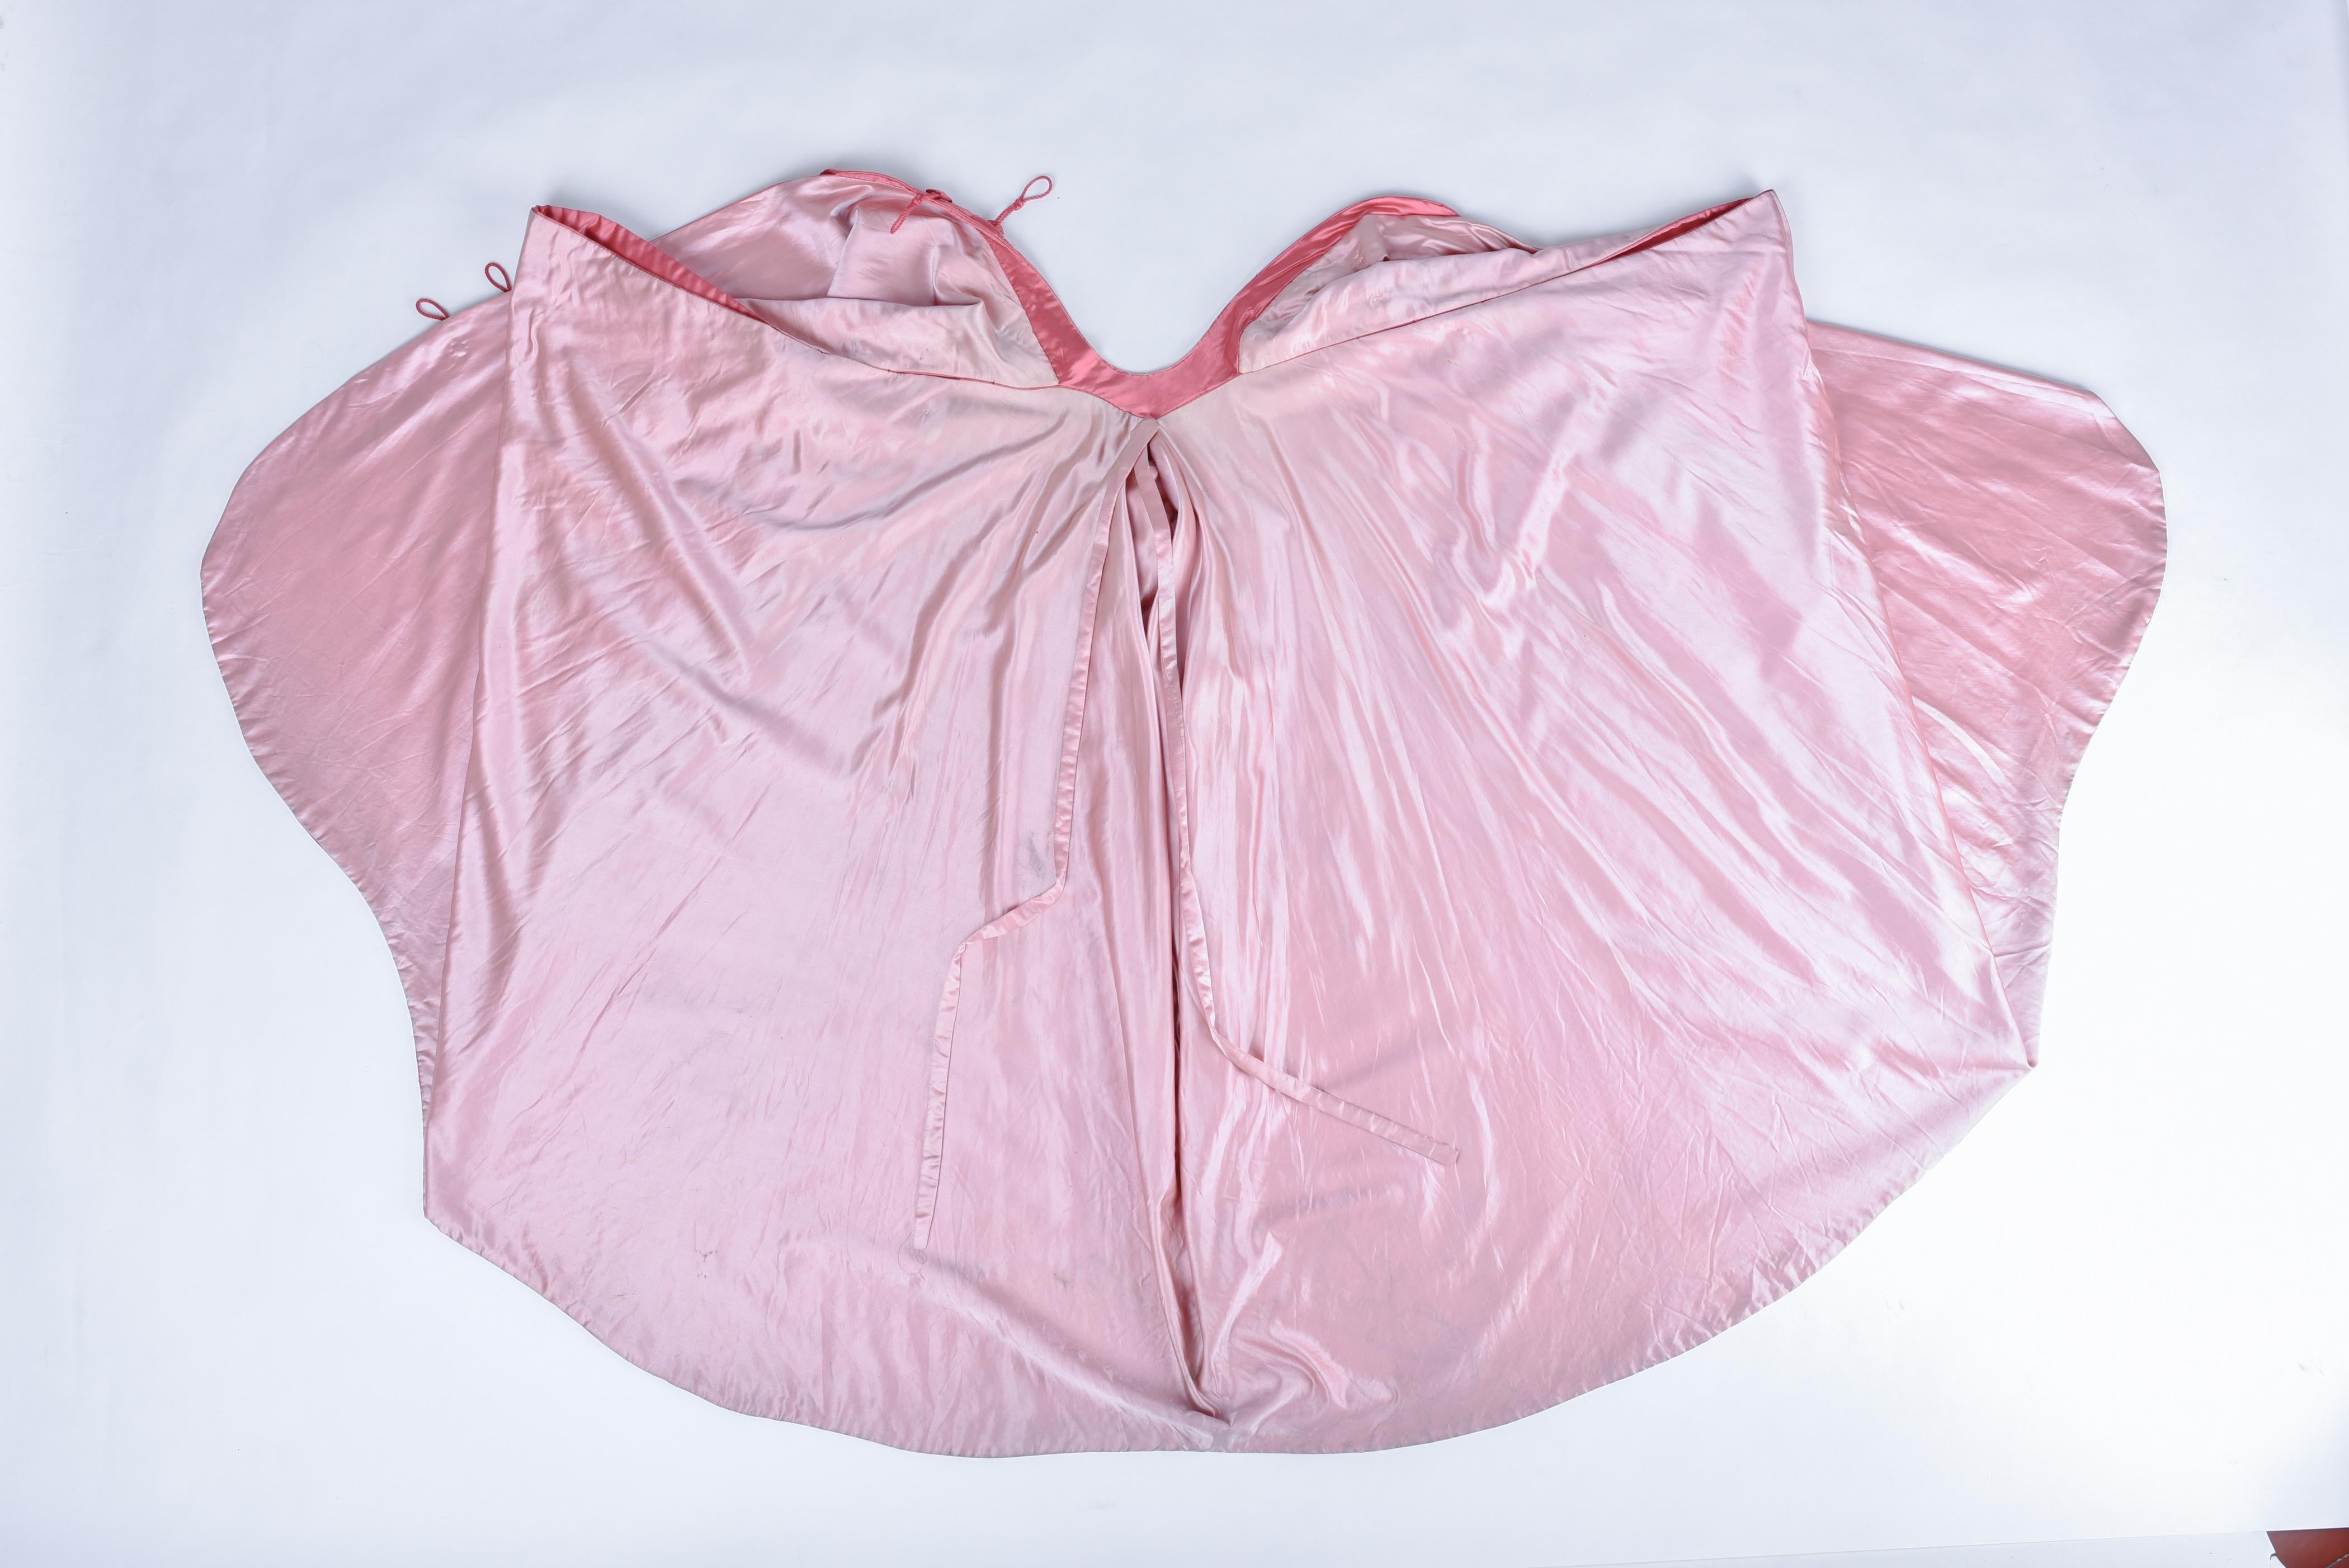 Fuschia Satin Evening Burnous By Liberty of London (Attributed to) Circa 1920 For Sale 6